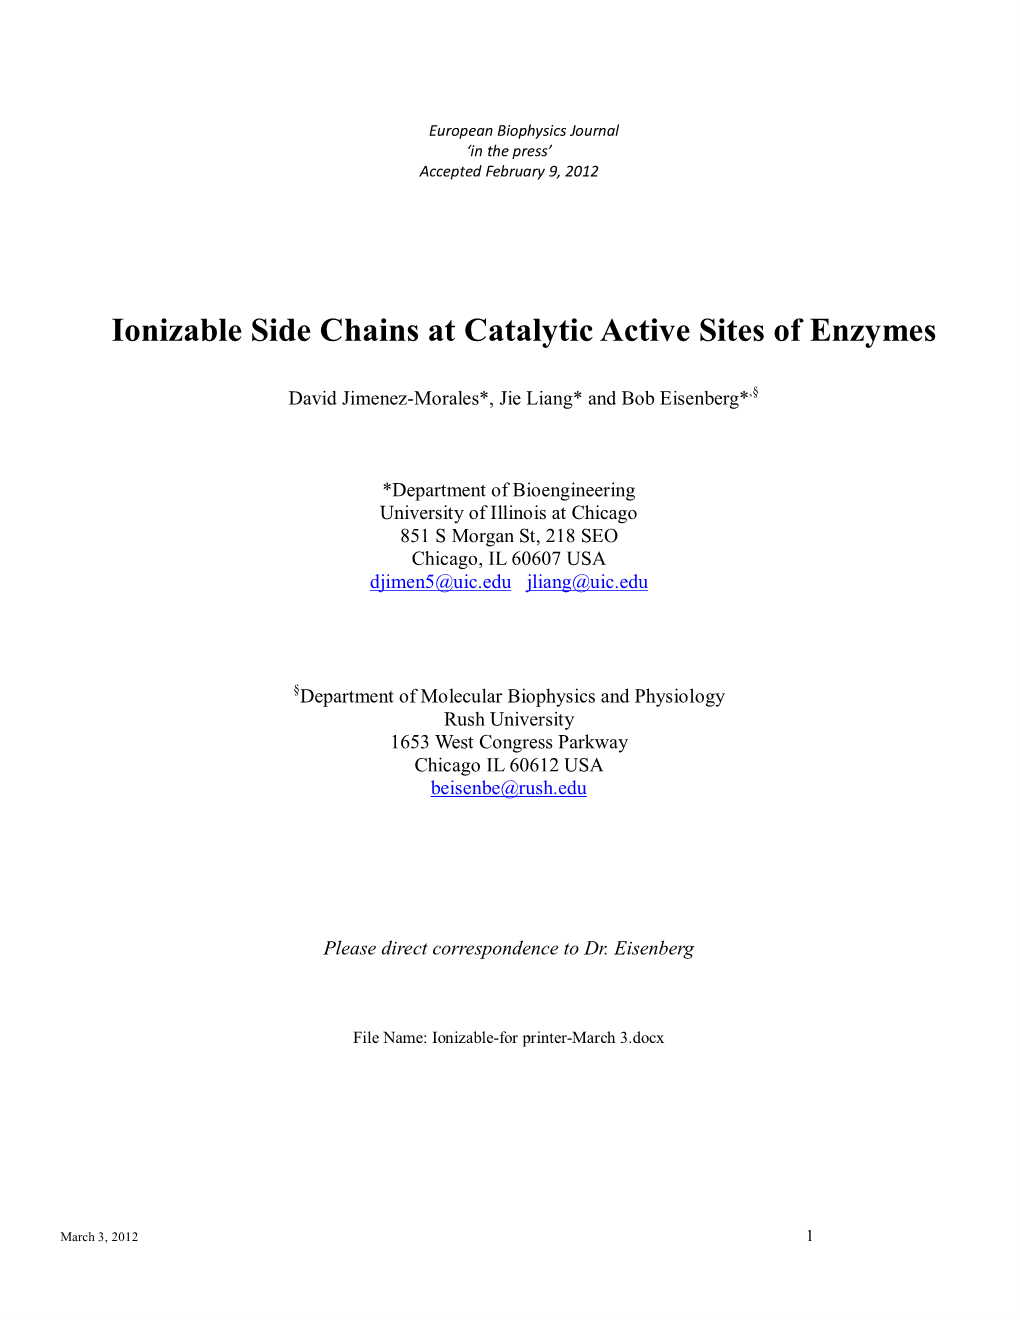 Ionizable Side Chains at Catalytic Active Sites of Enzymes